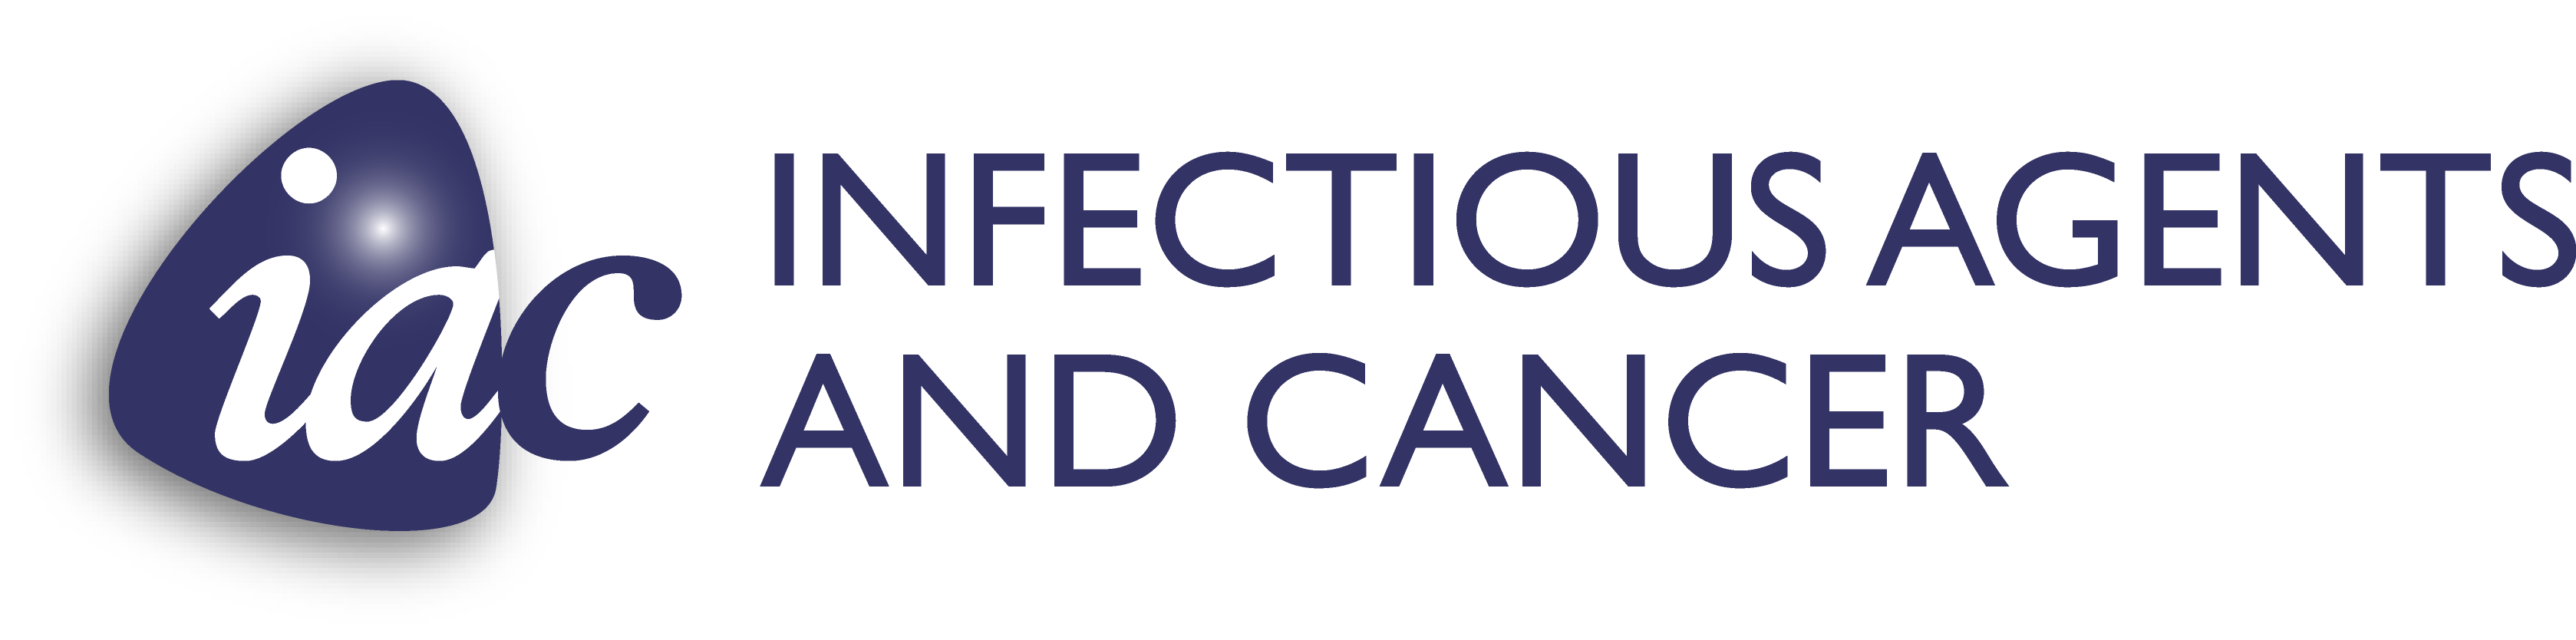 Infectious Agents & Cancer